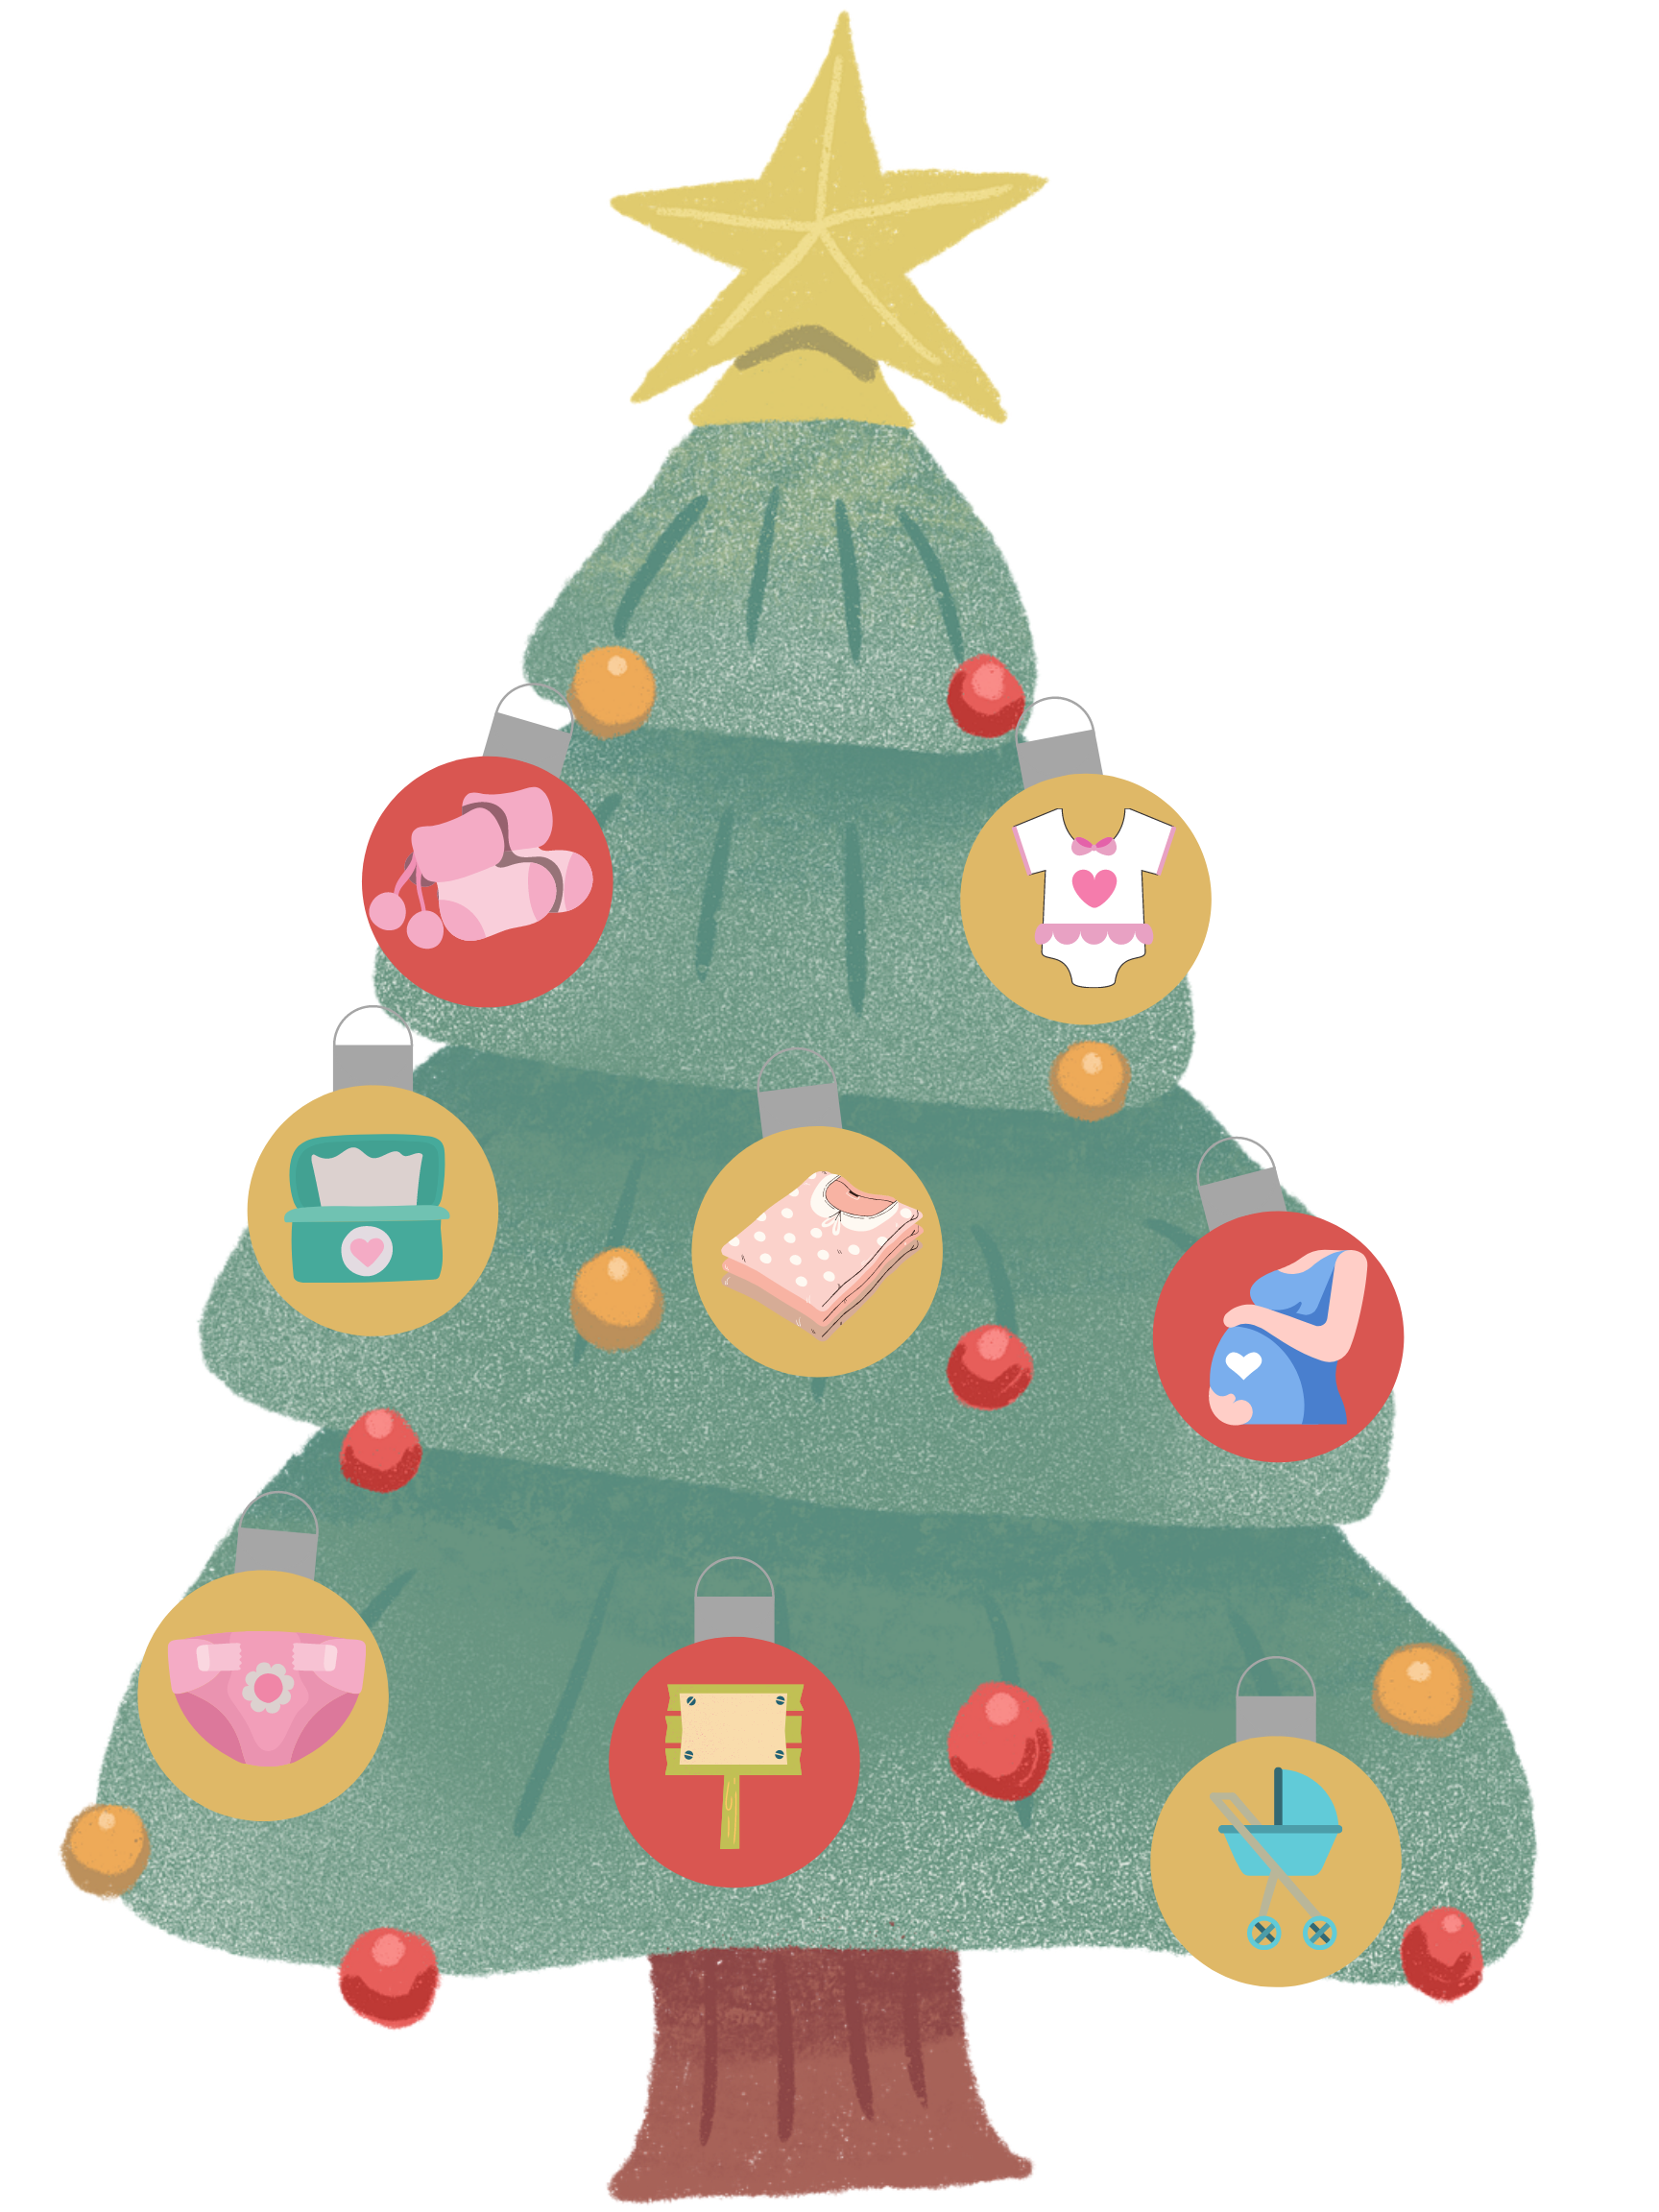 Advent Giving Tree